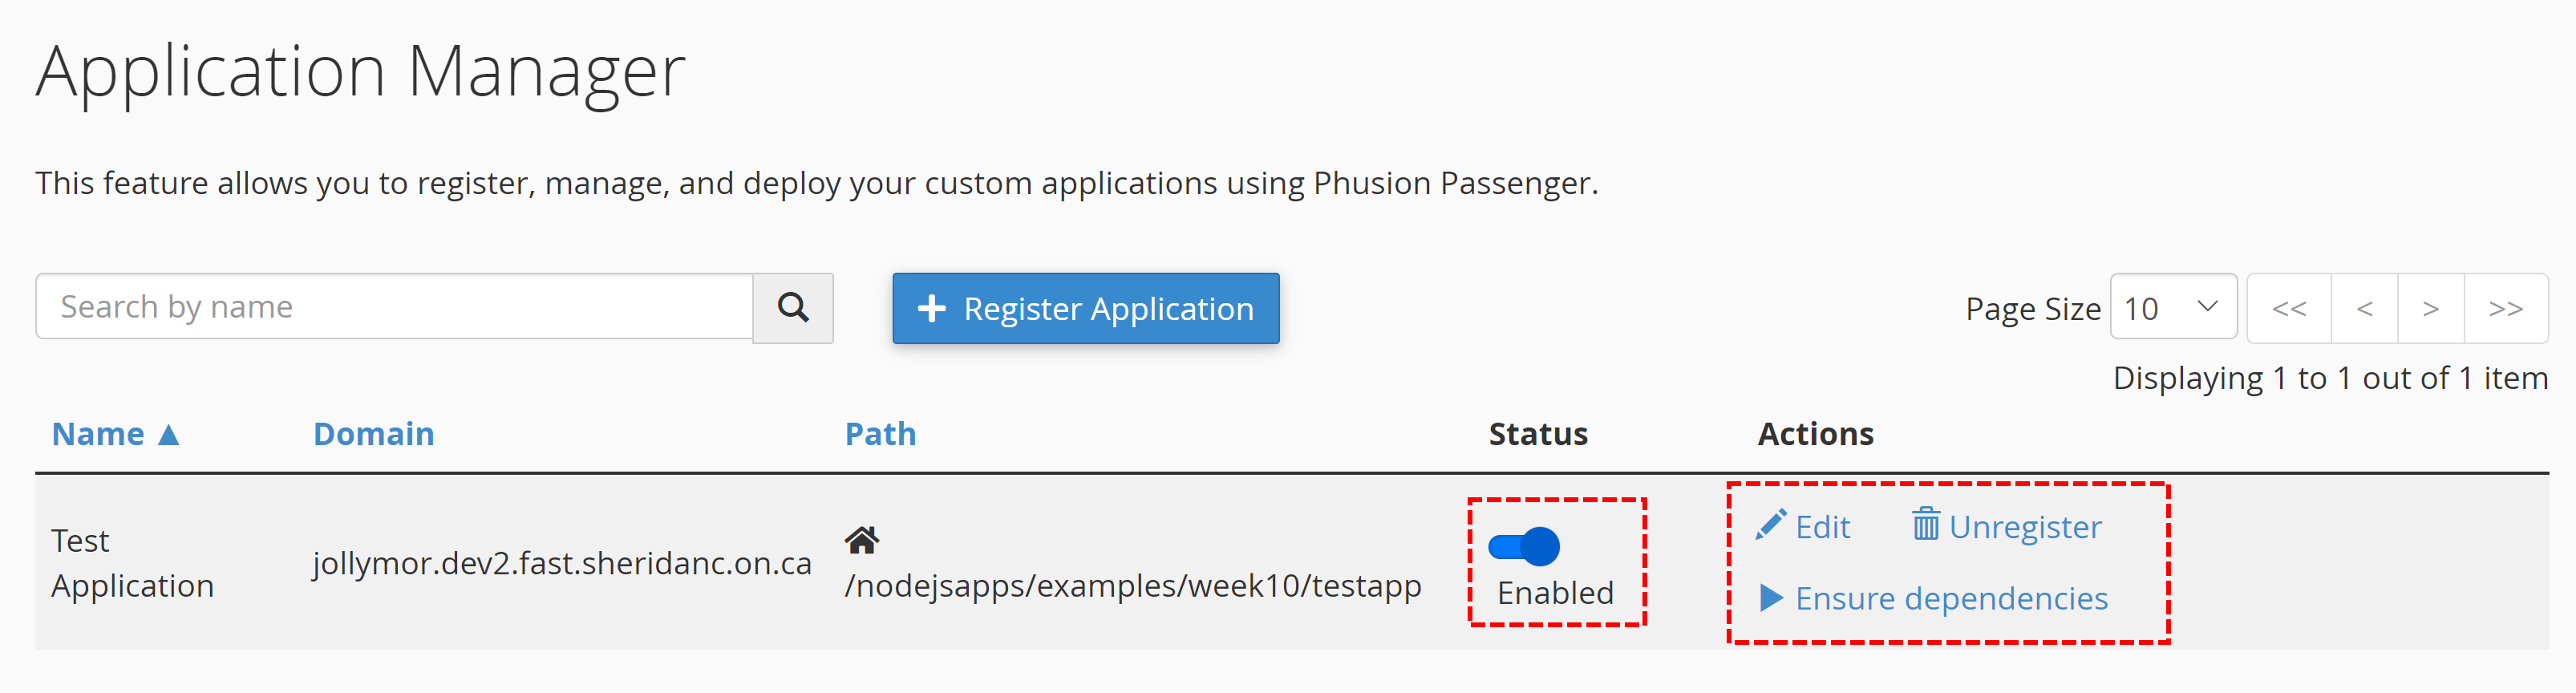 the application appears in the application manager list